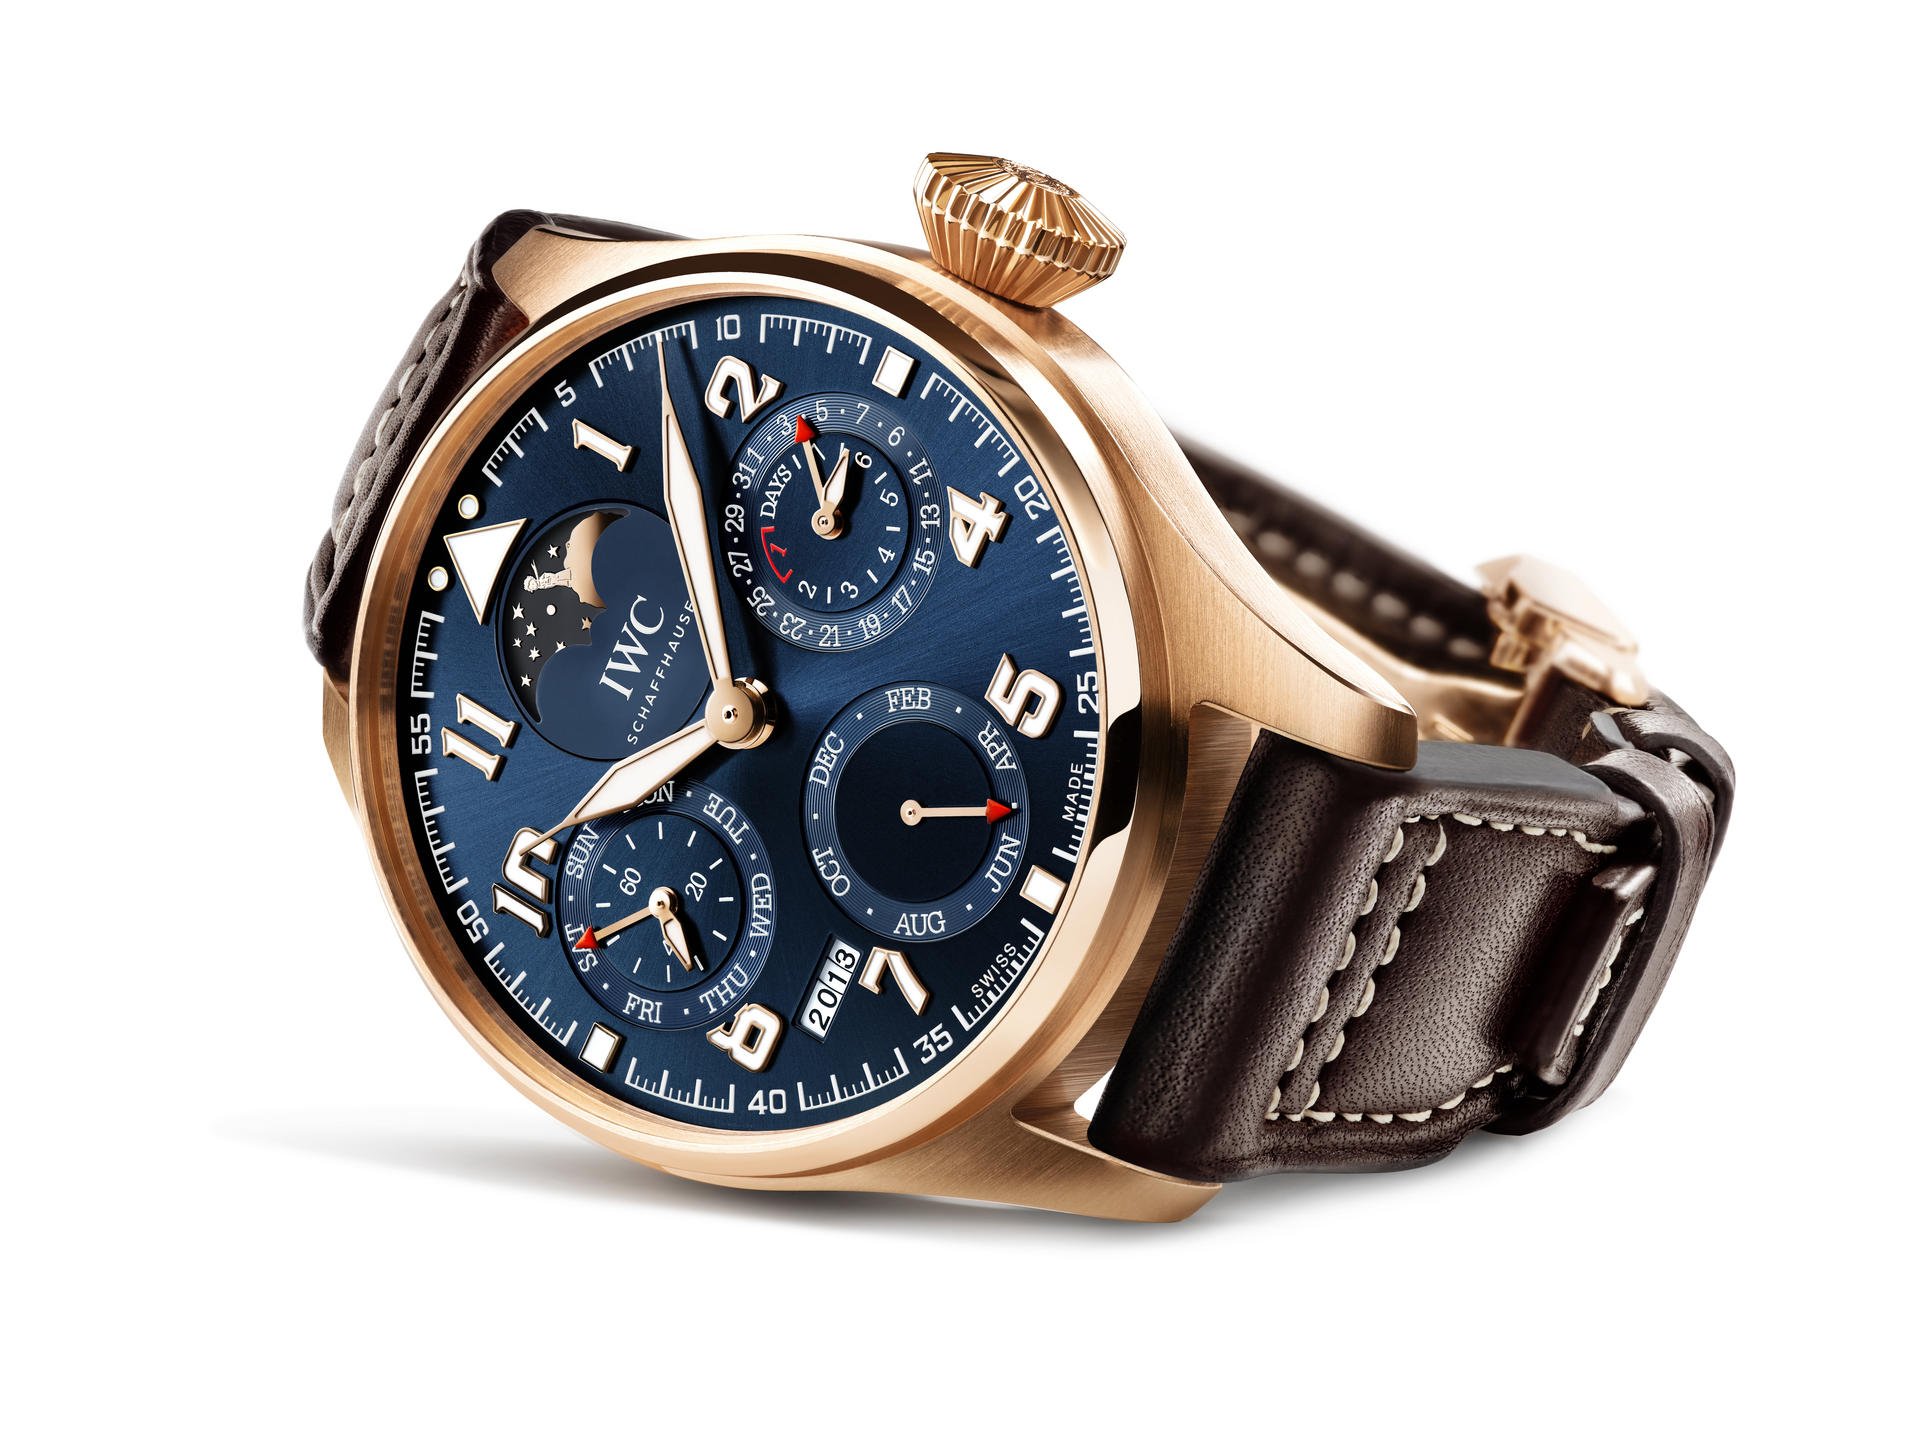 IWC Big Pilot’s Watch Perpetual: Seventy years after the release of author and pilot Antoine de Saint-Exupéry's "Le Petit Prince", IWC launches two special limited editions of its Pilot's Watch. The Big Pilot's Watch features a bold cockpit-inspired design and seven-day power reserve.
